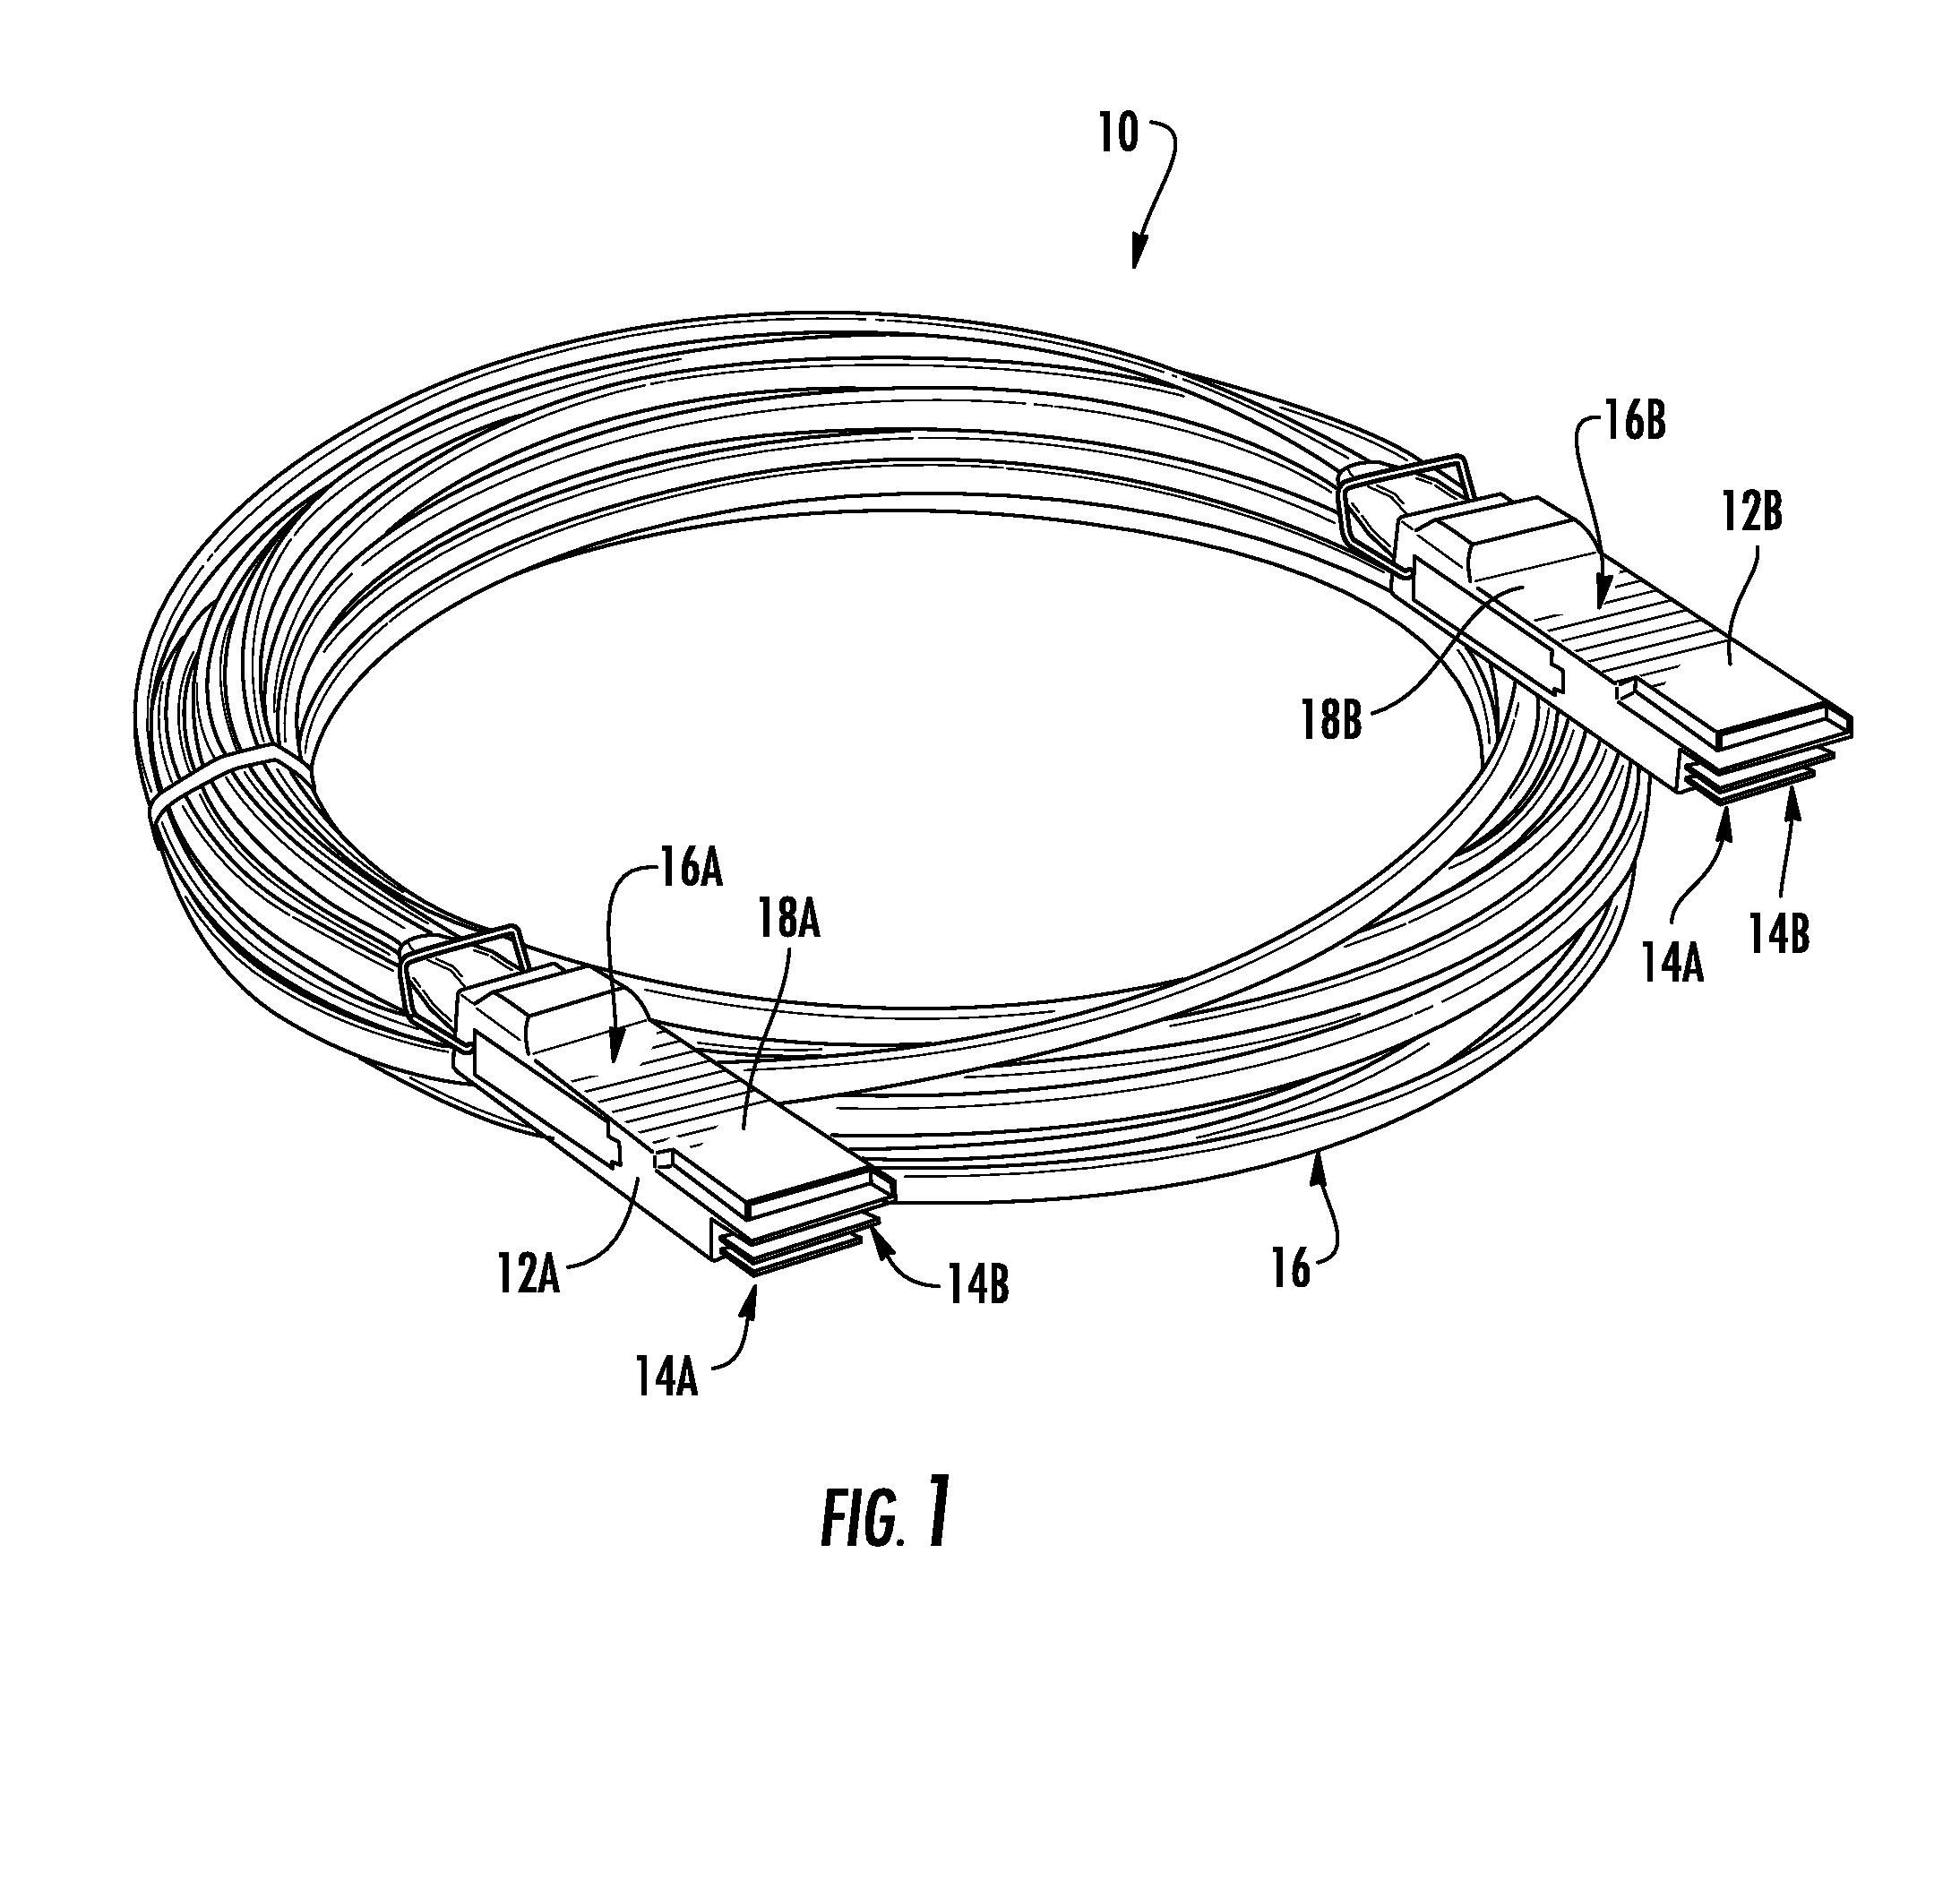 Receiver optical assemblies (ROAS) having photo-detector remotely located from transimpedance amplifier, and related components, circuits, and methods